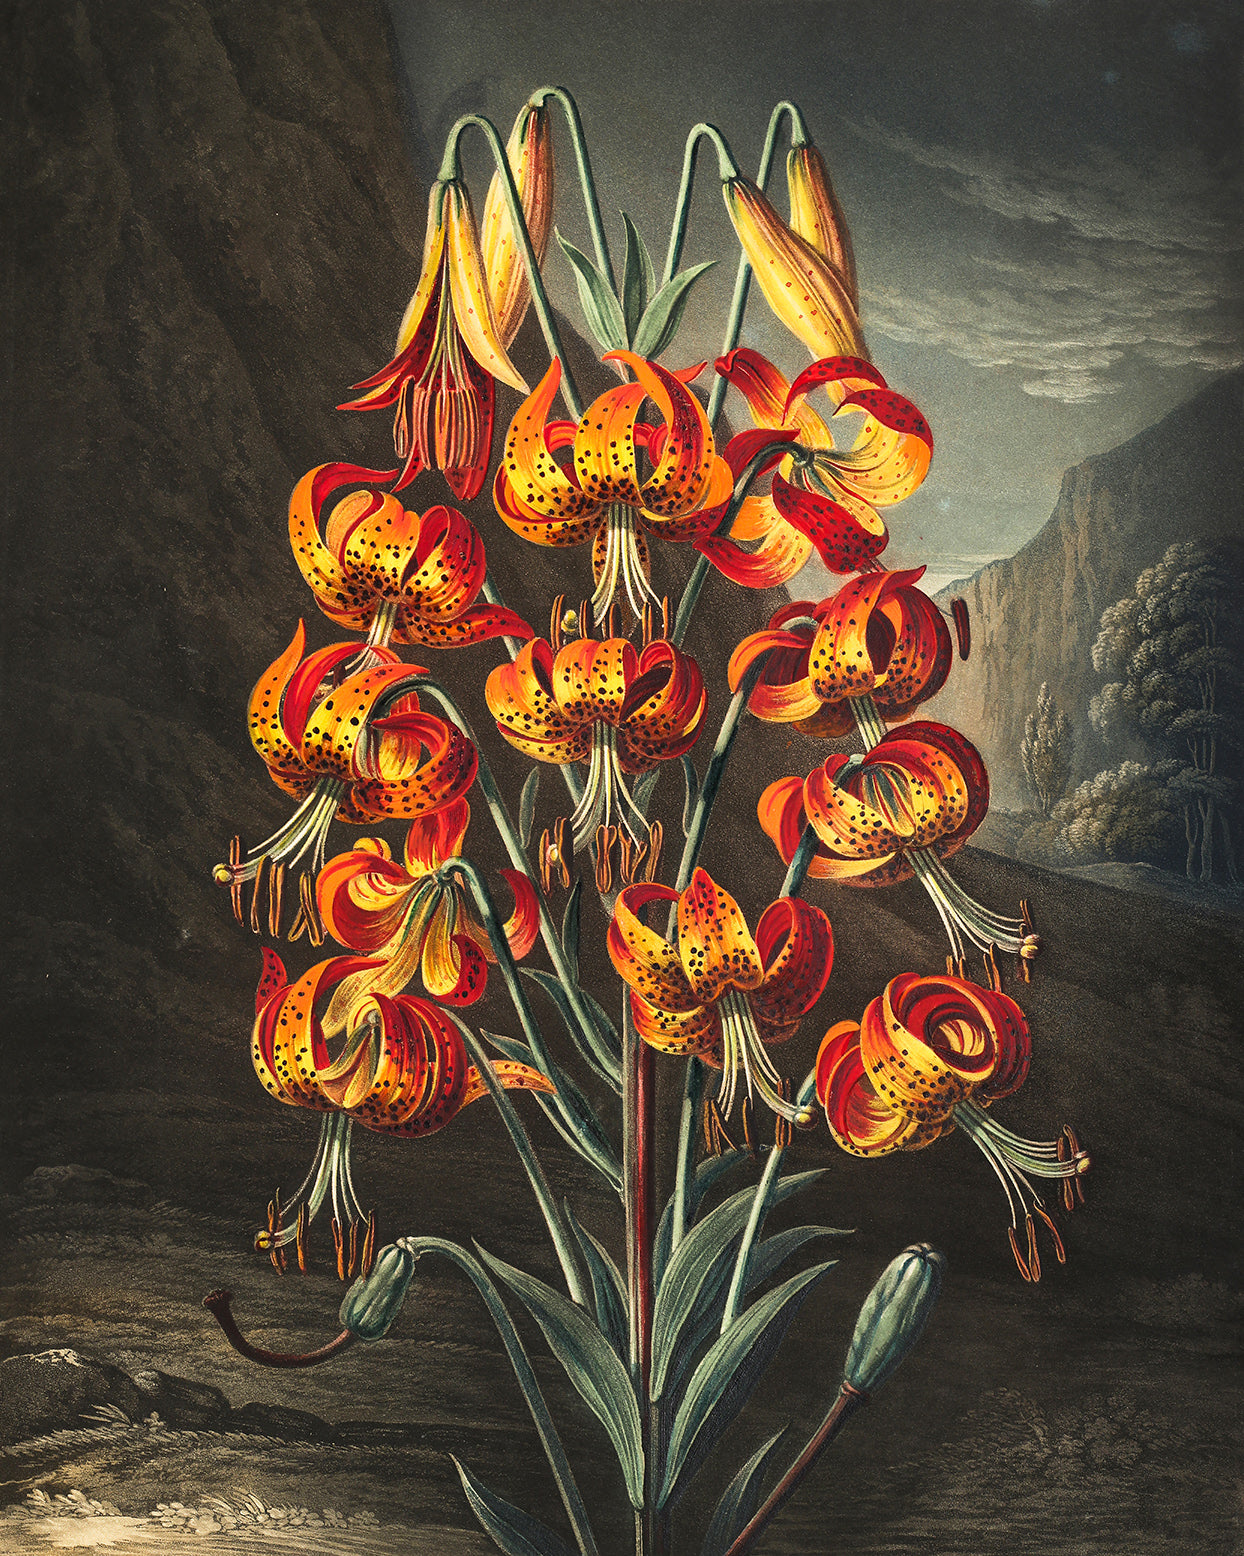 Illustration of The Superb Lily by Philip Reinagle, orange and red flowers with hills in background